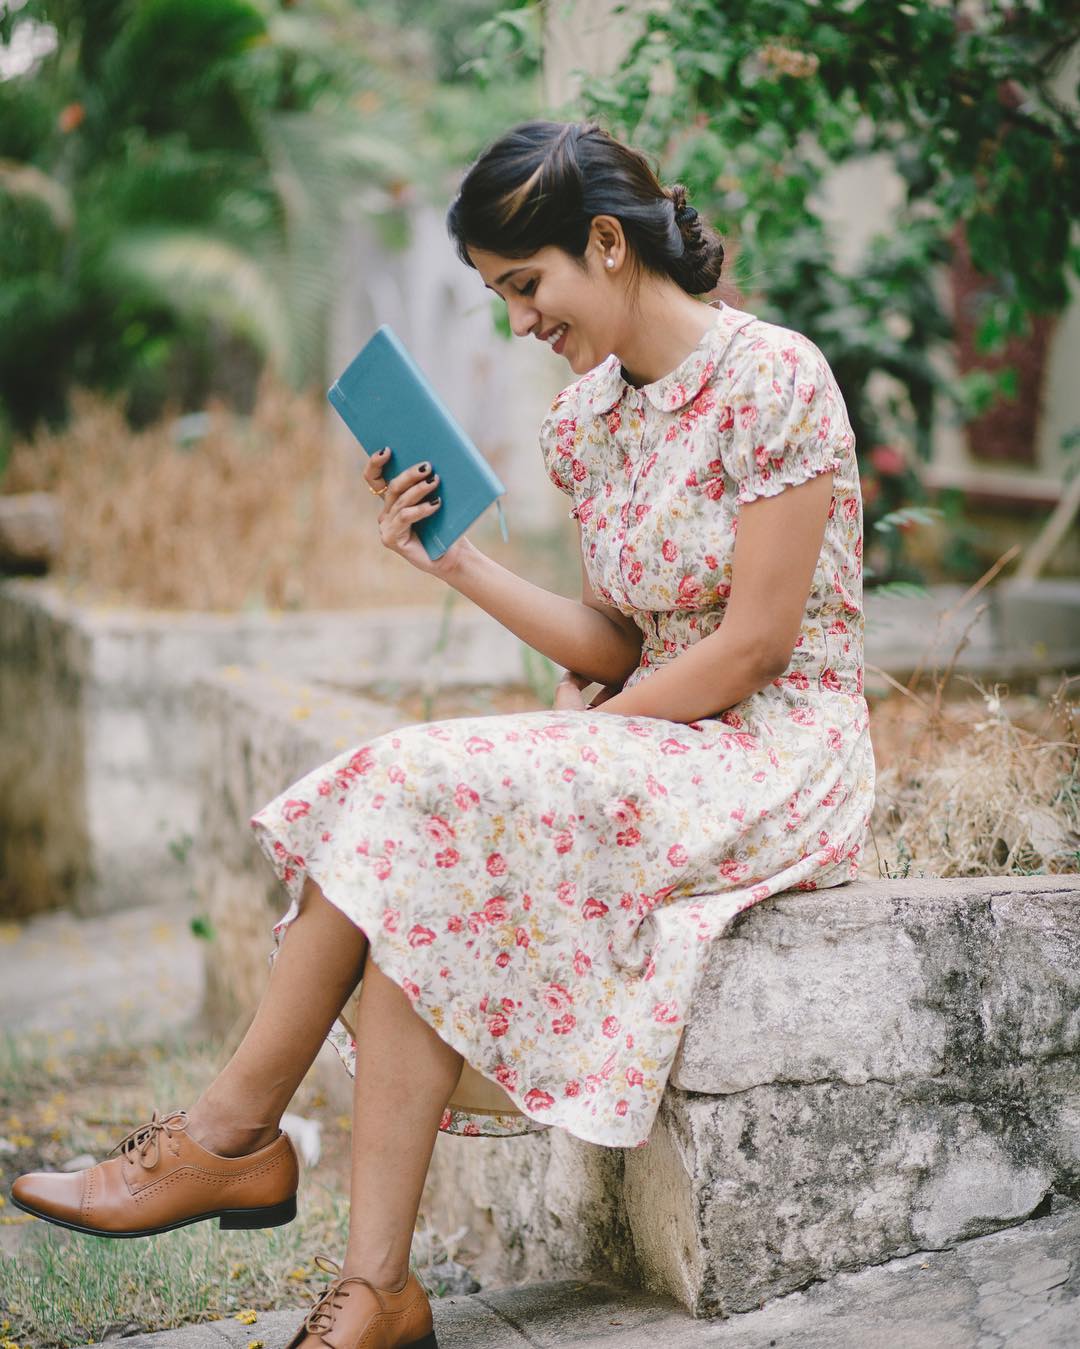 Chandini Refreshing Look In Floral Print Dress With Formal Shoes Something Different For Casual Wear Outfit Chandini Chowdary Simple Outfit , Style and Look